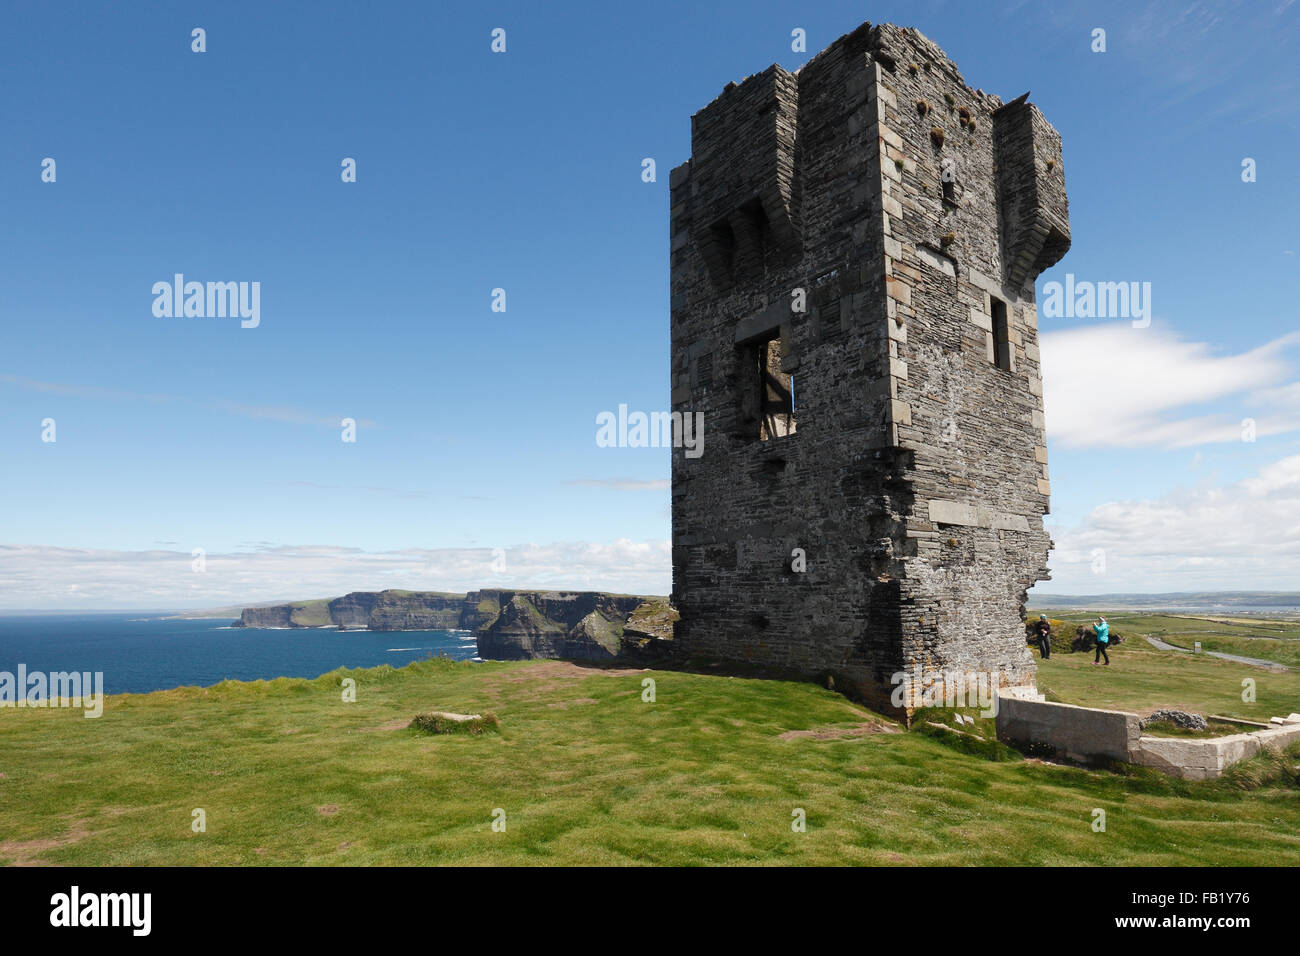 Moher Tower at Hag's Head near Liscannor, Cliffs of Moher, County Clare, Ireland Stock Photo